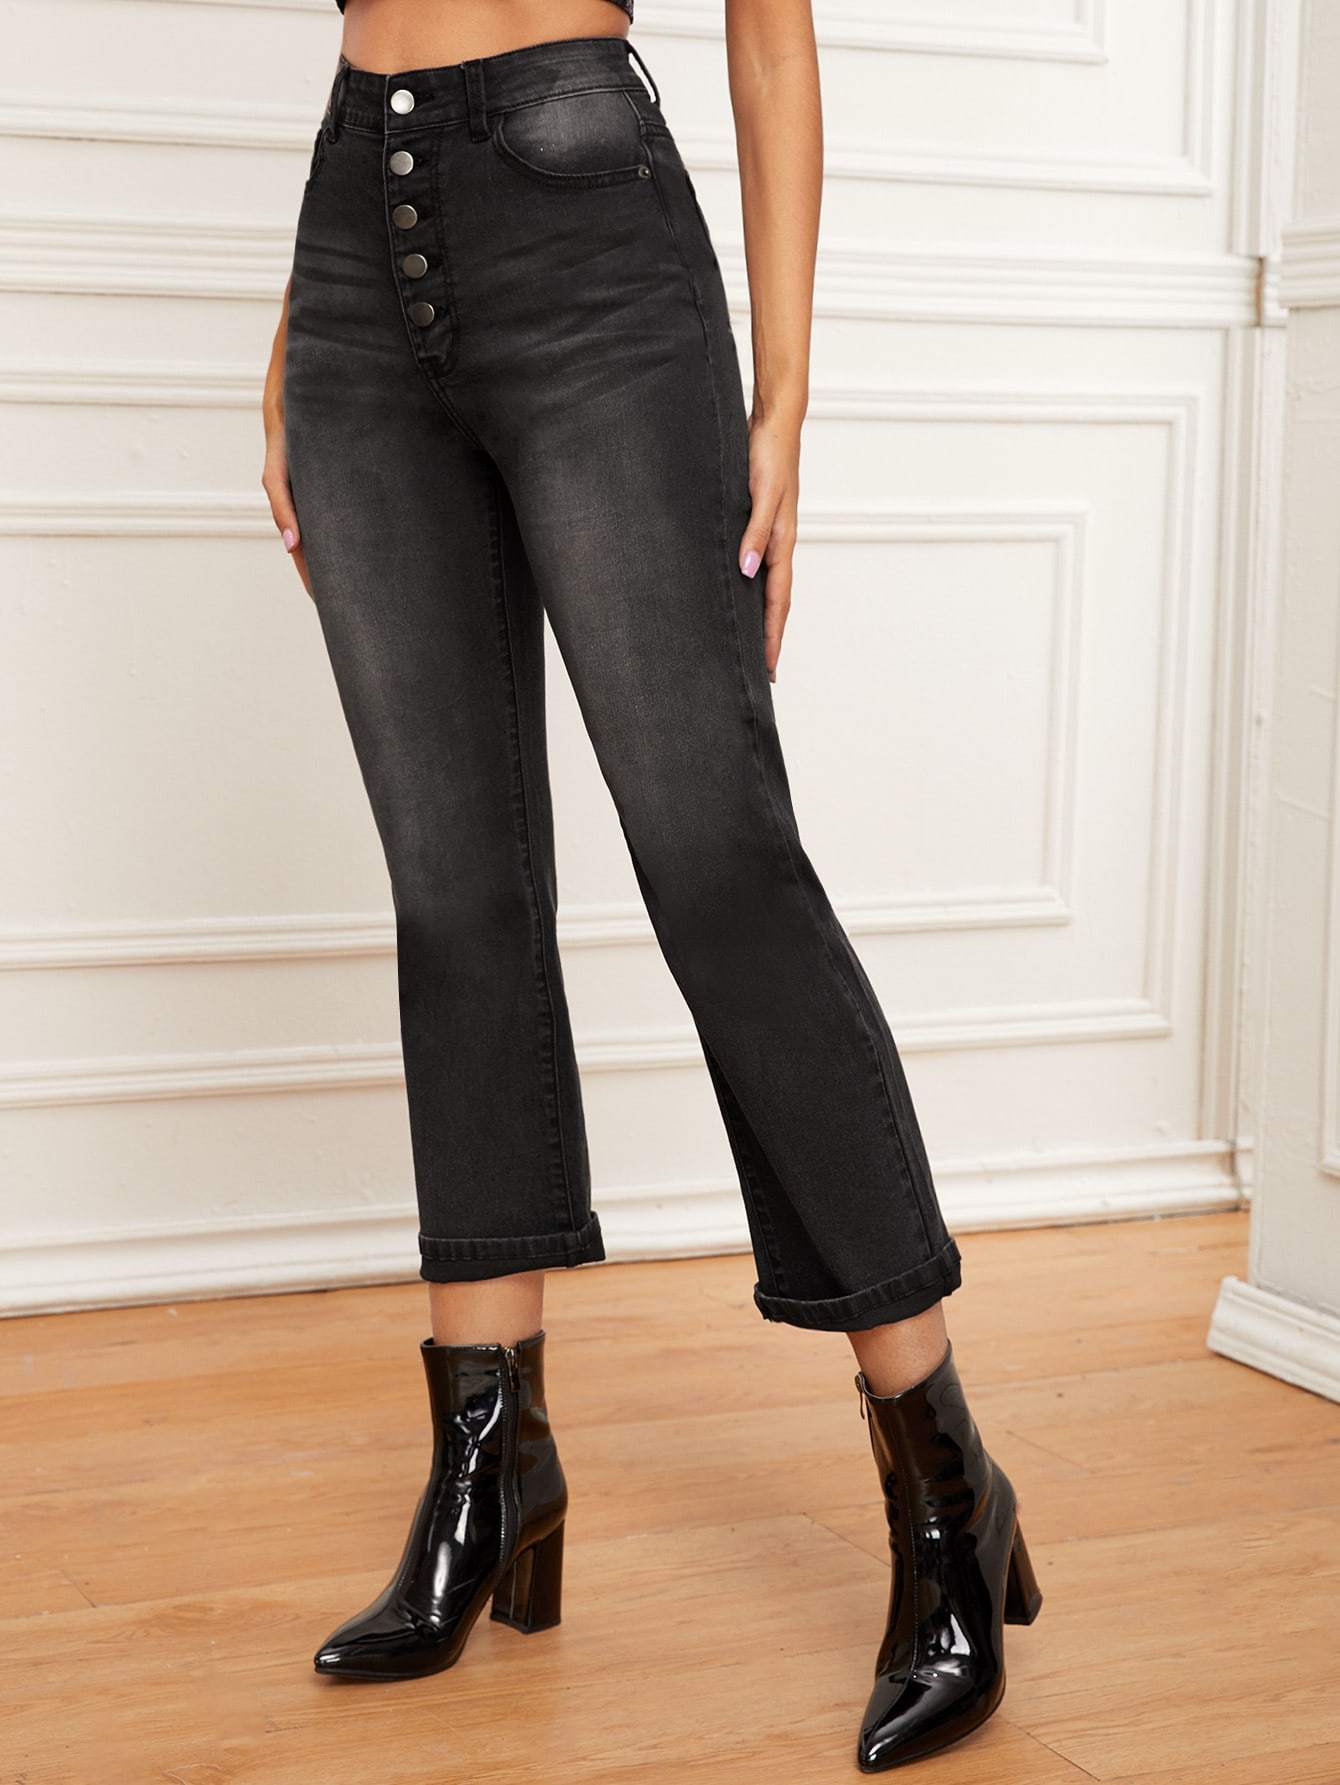 Grey High Waist Button Fly Cropped Jeans